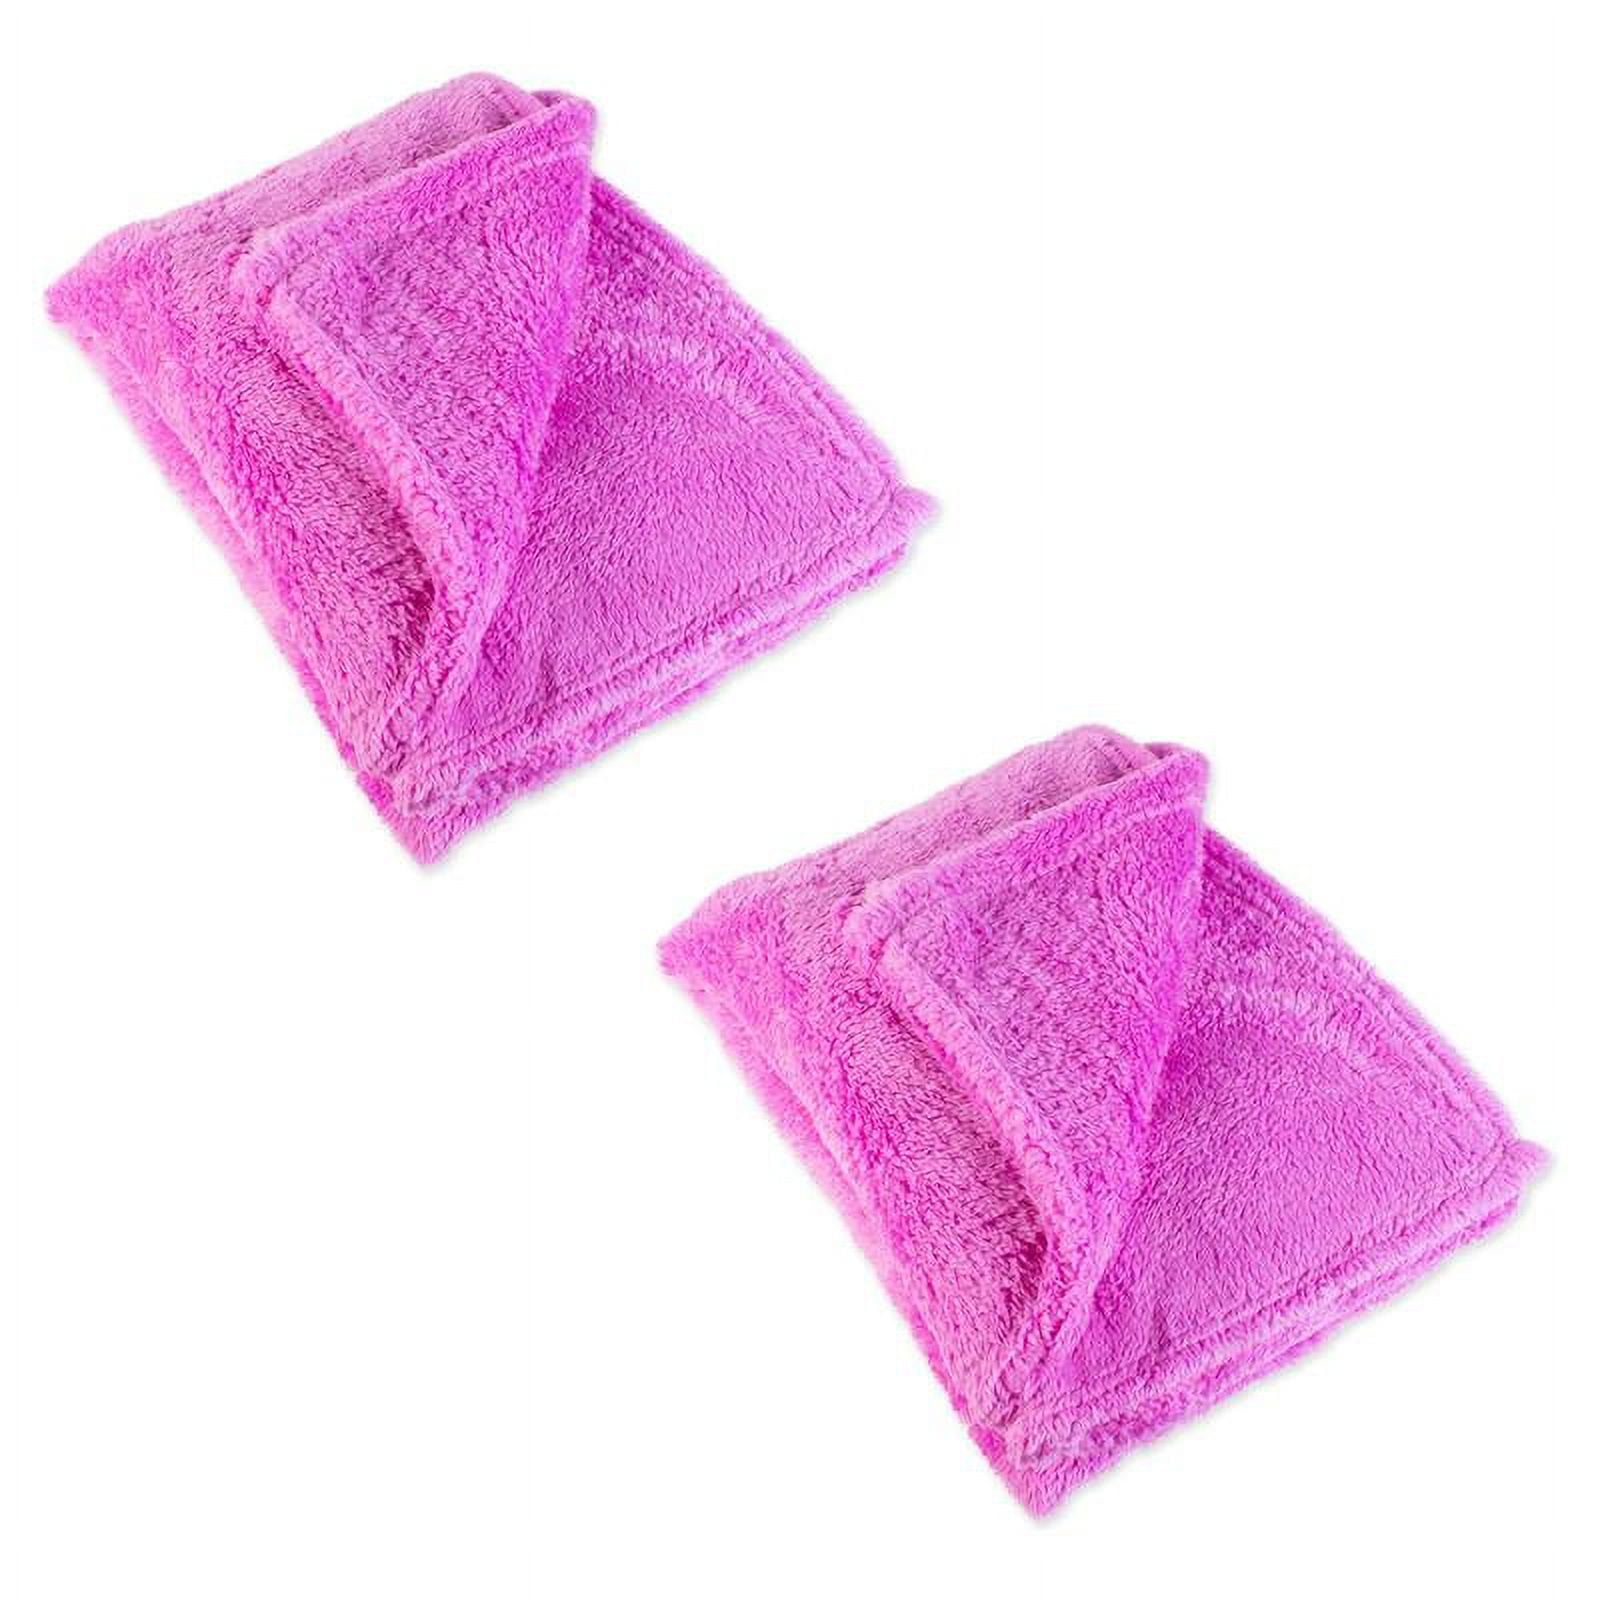 70108a Bright Fuzzy Fleece Throw, Orchid, 50 X 60 In. - Pack Of 2